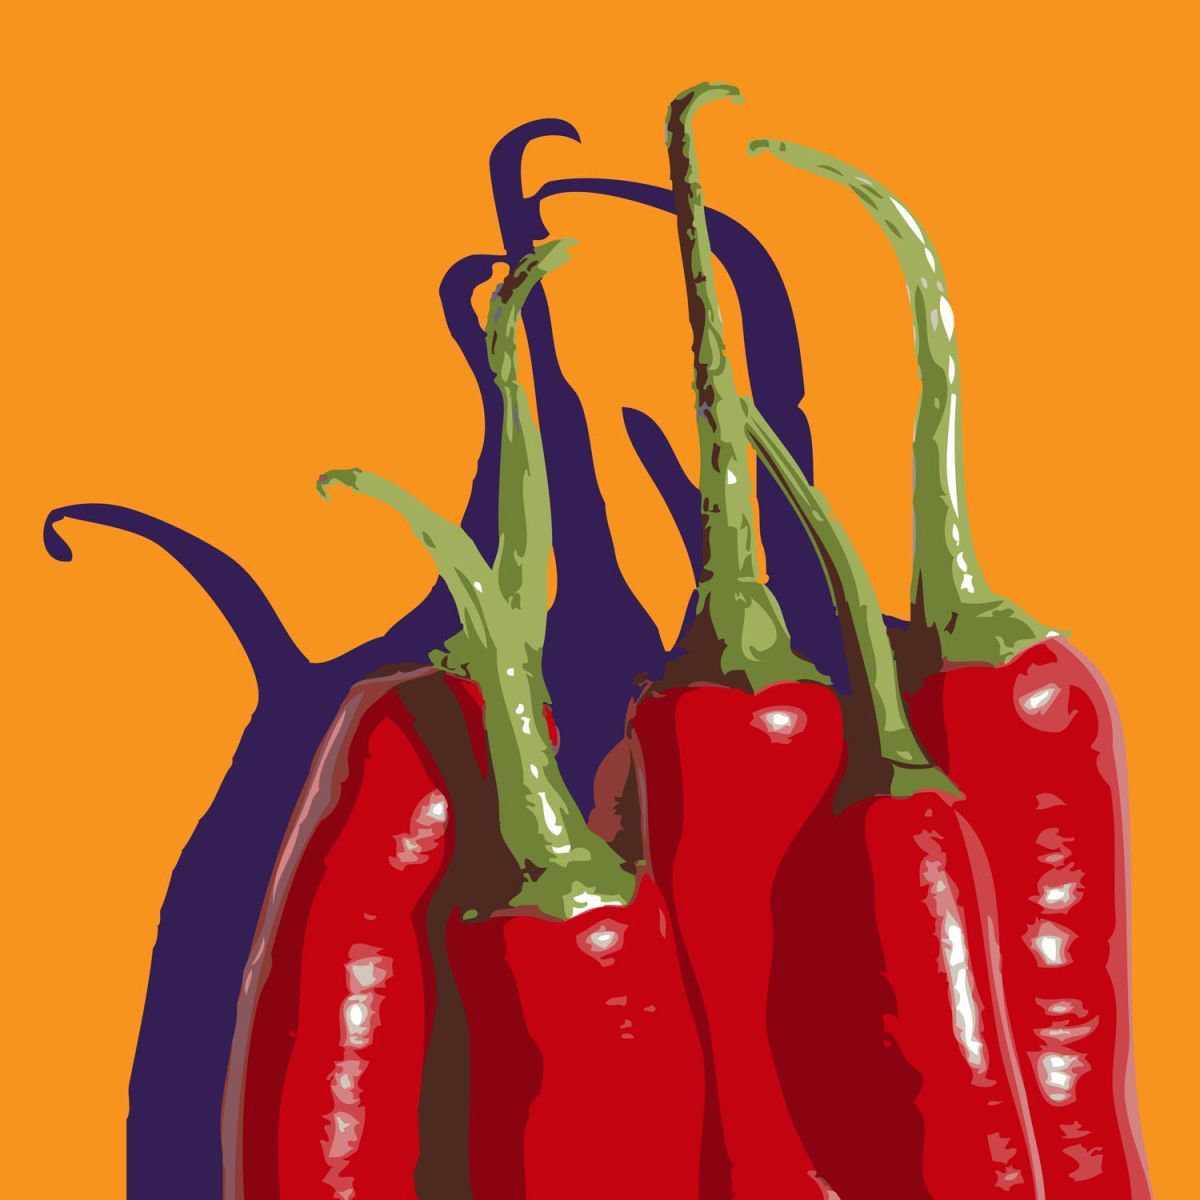 5 CHILIES#2 by Keith Dodd